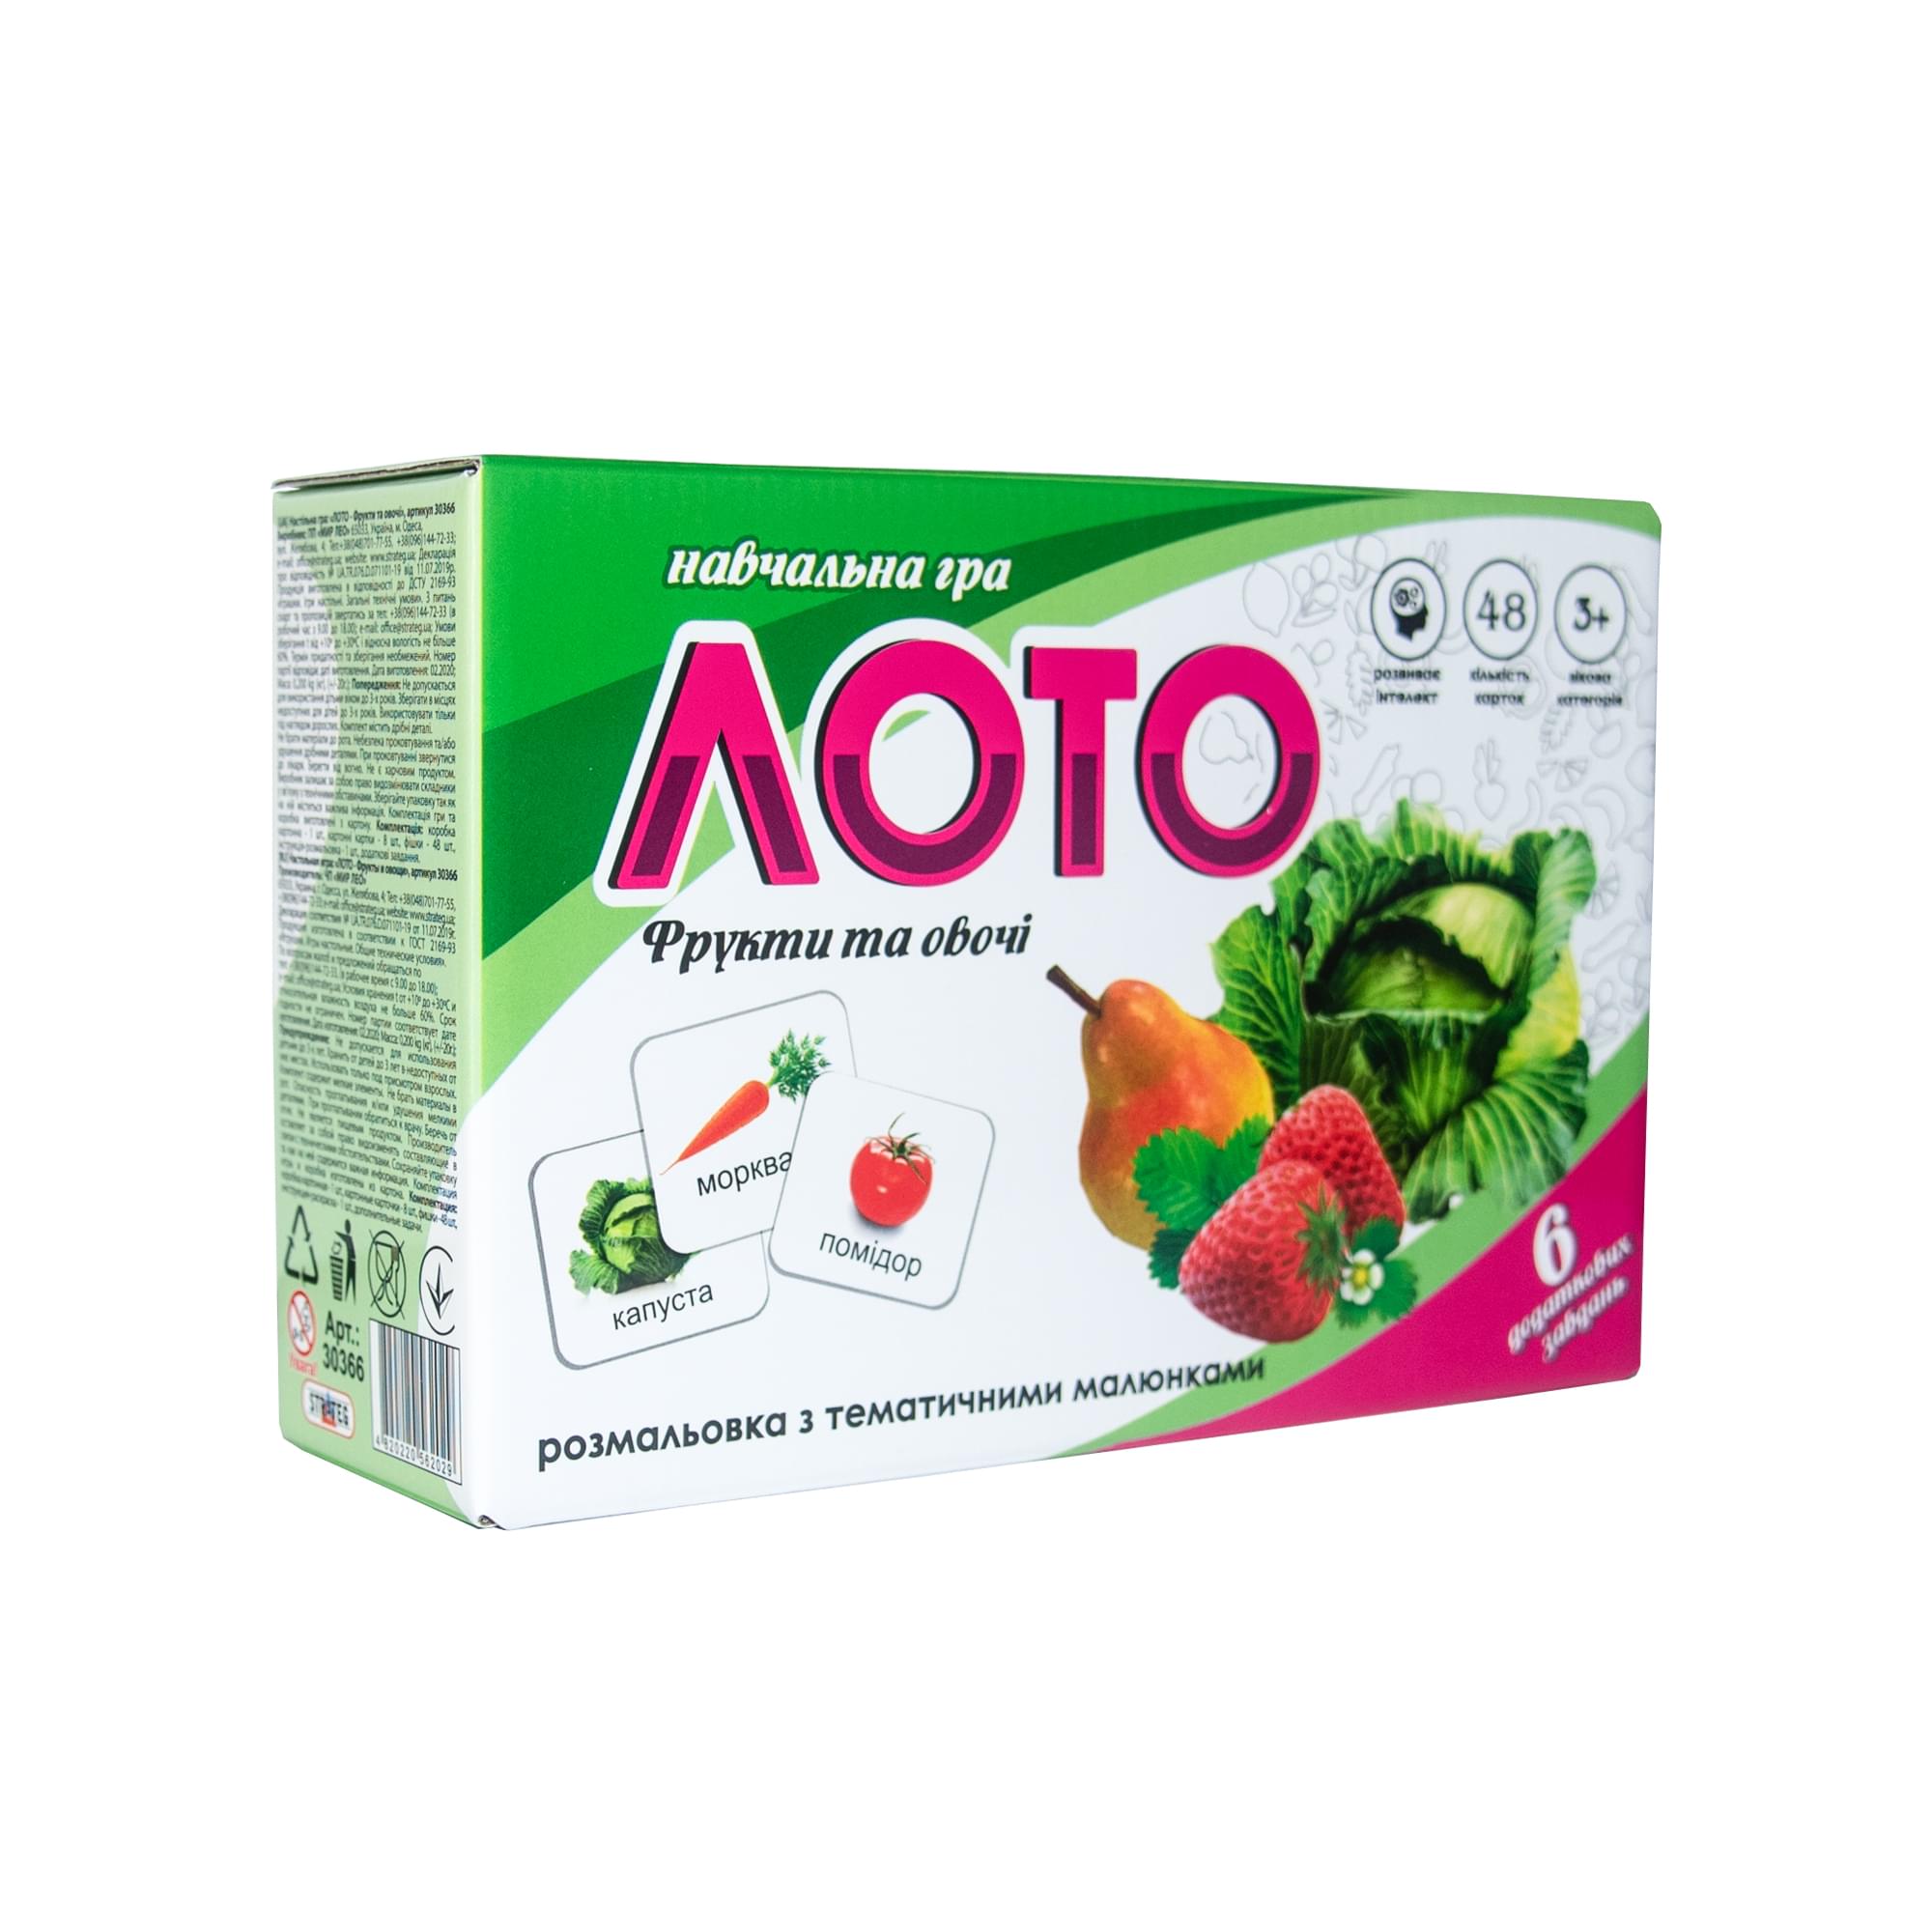 Lotto "Fruits and vegetables" (ukr.) (30366)